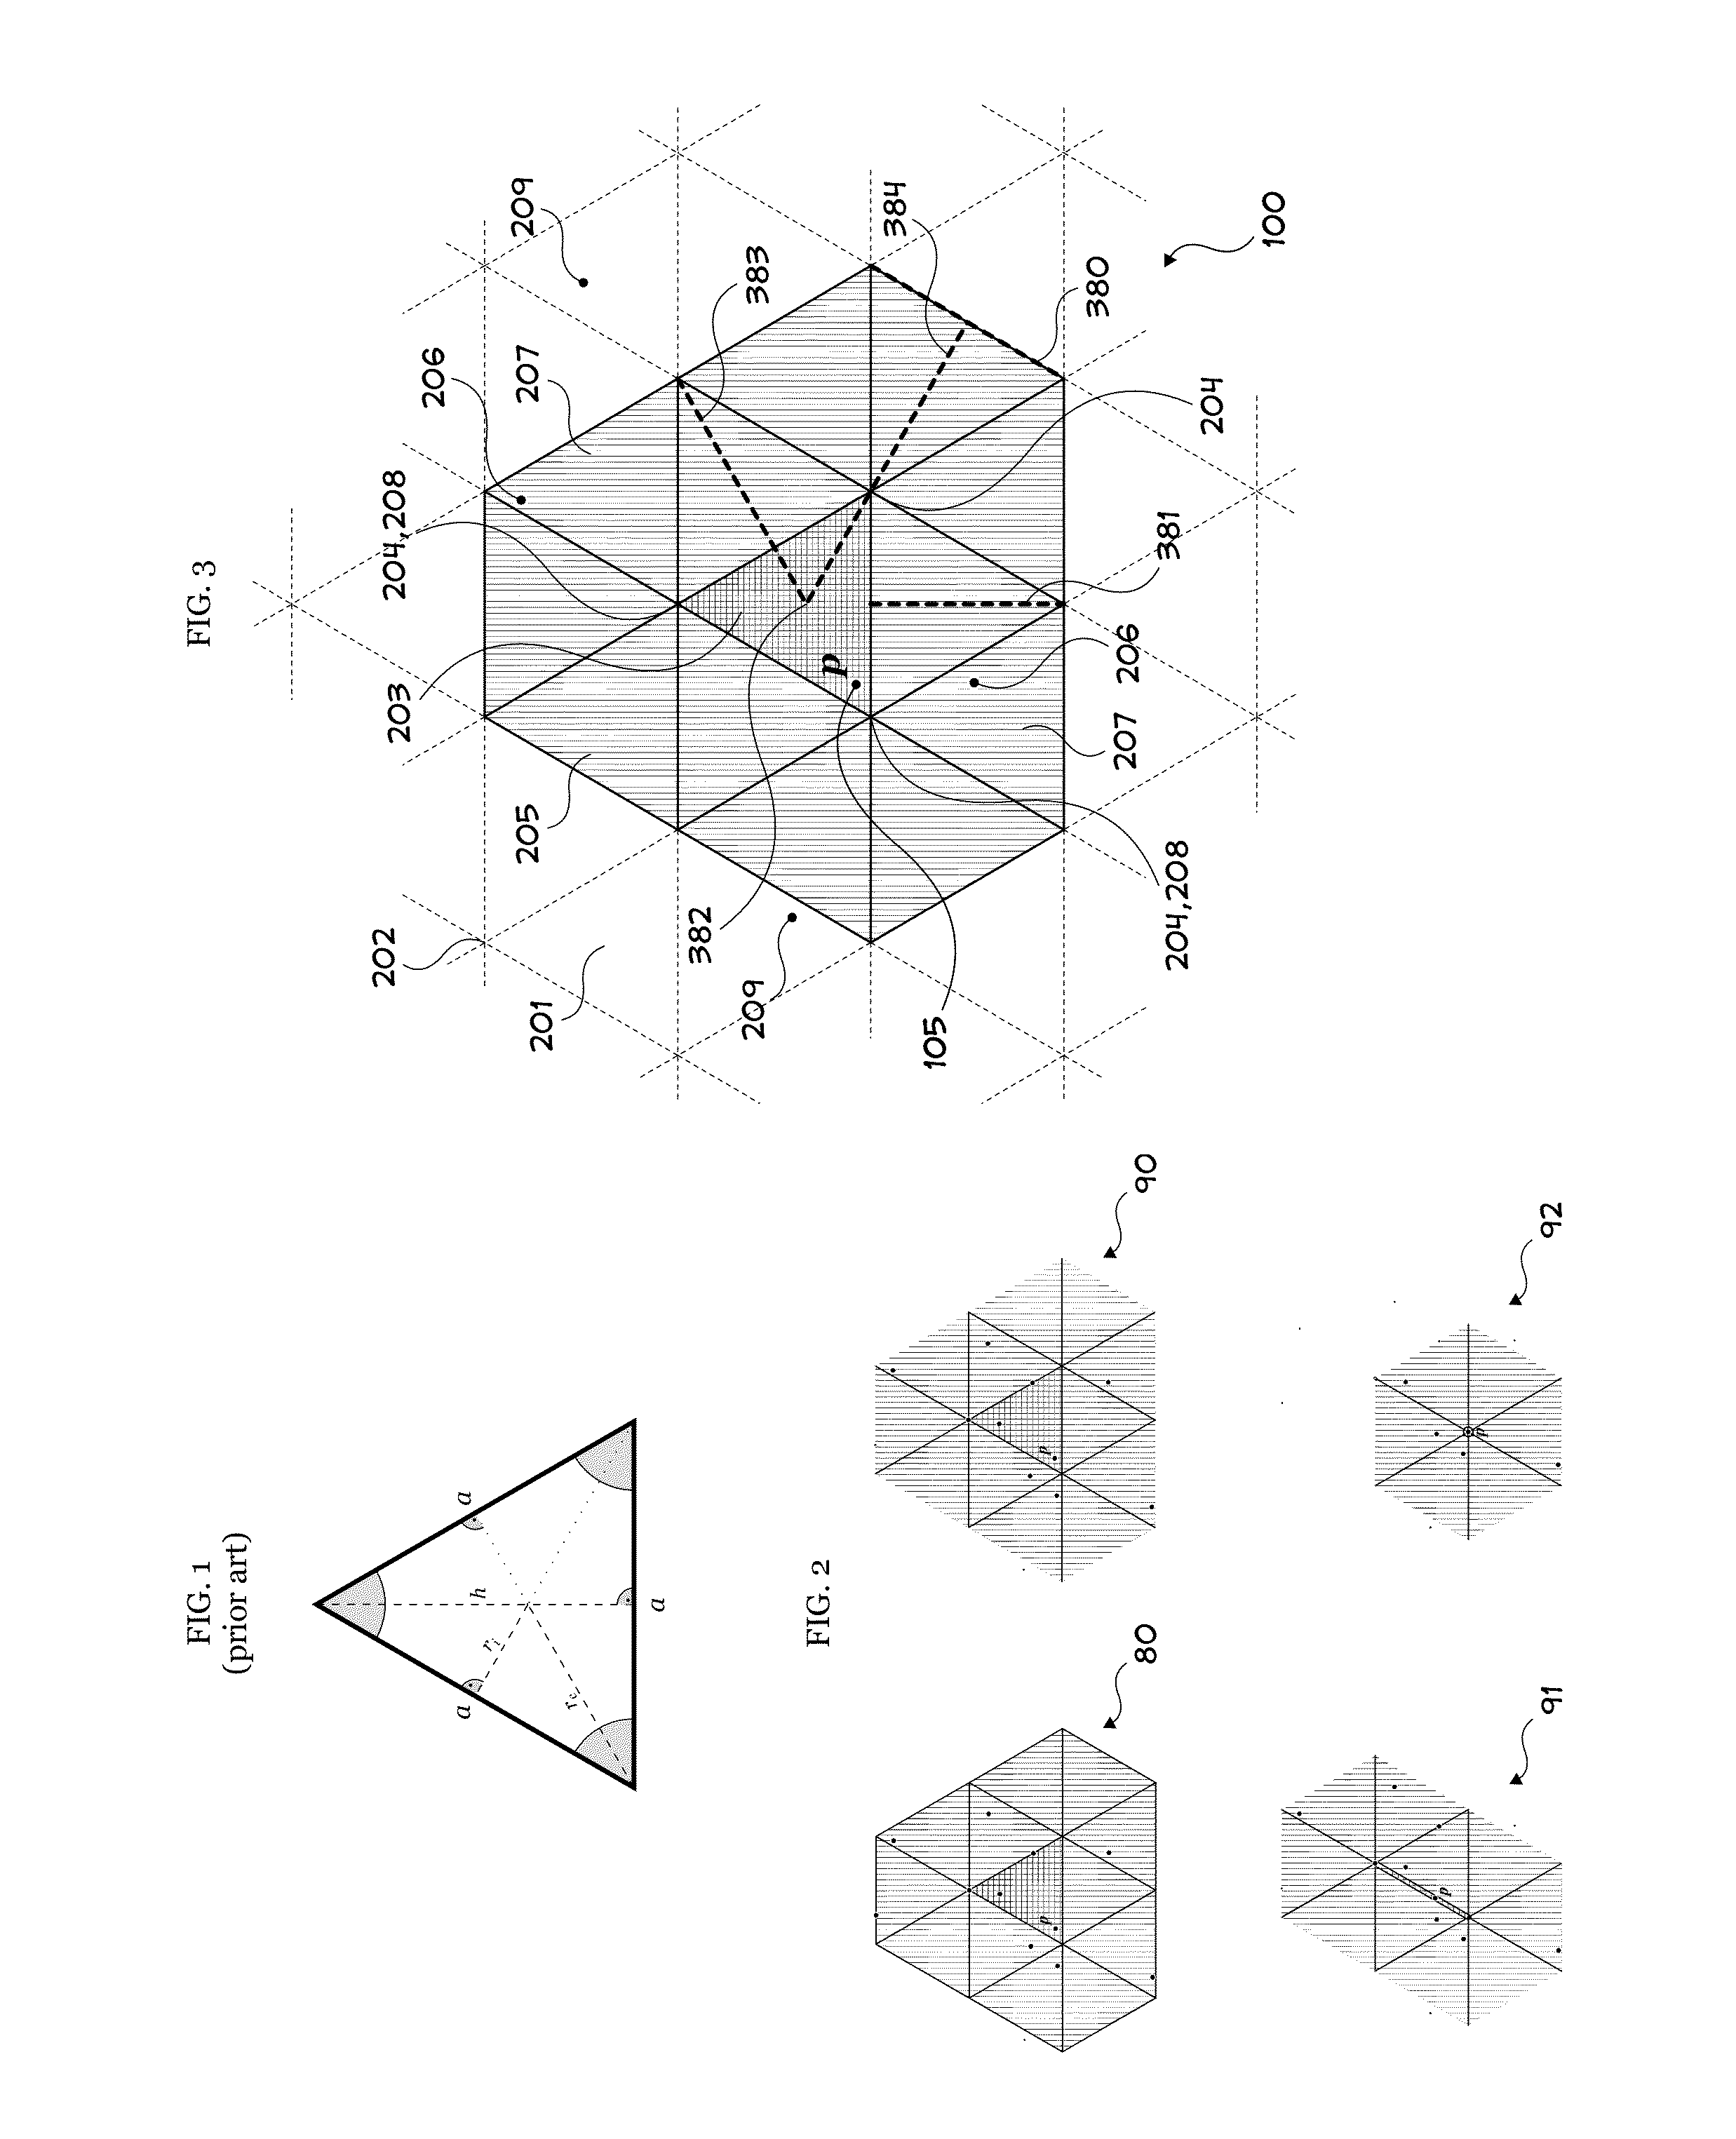 Storage of Arbitrary Points in N-Space and Retrieval of Subset Thereof Based on a Determinate Distance Interval from an Arbitrary Reference Point